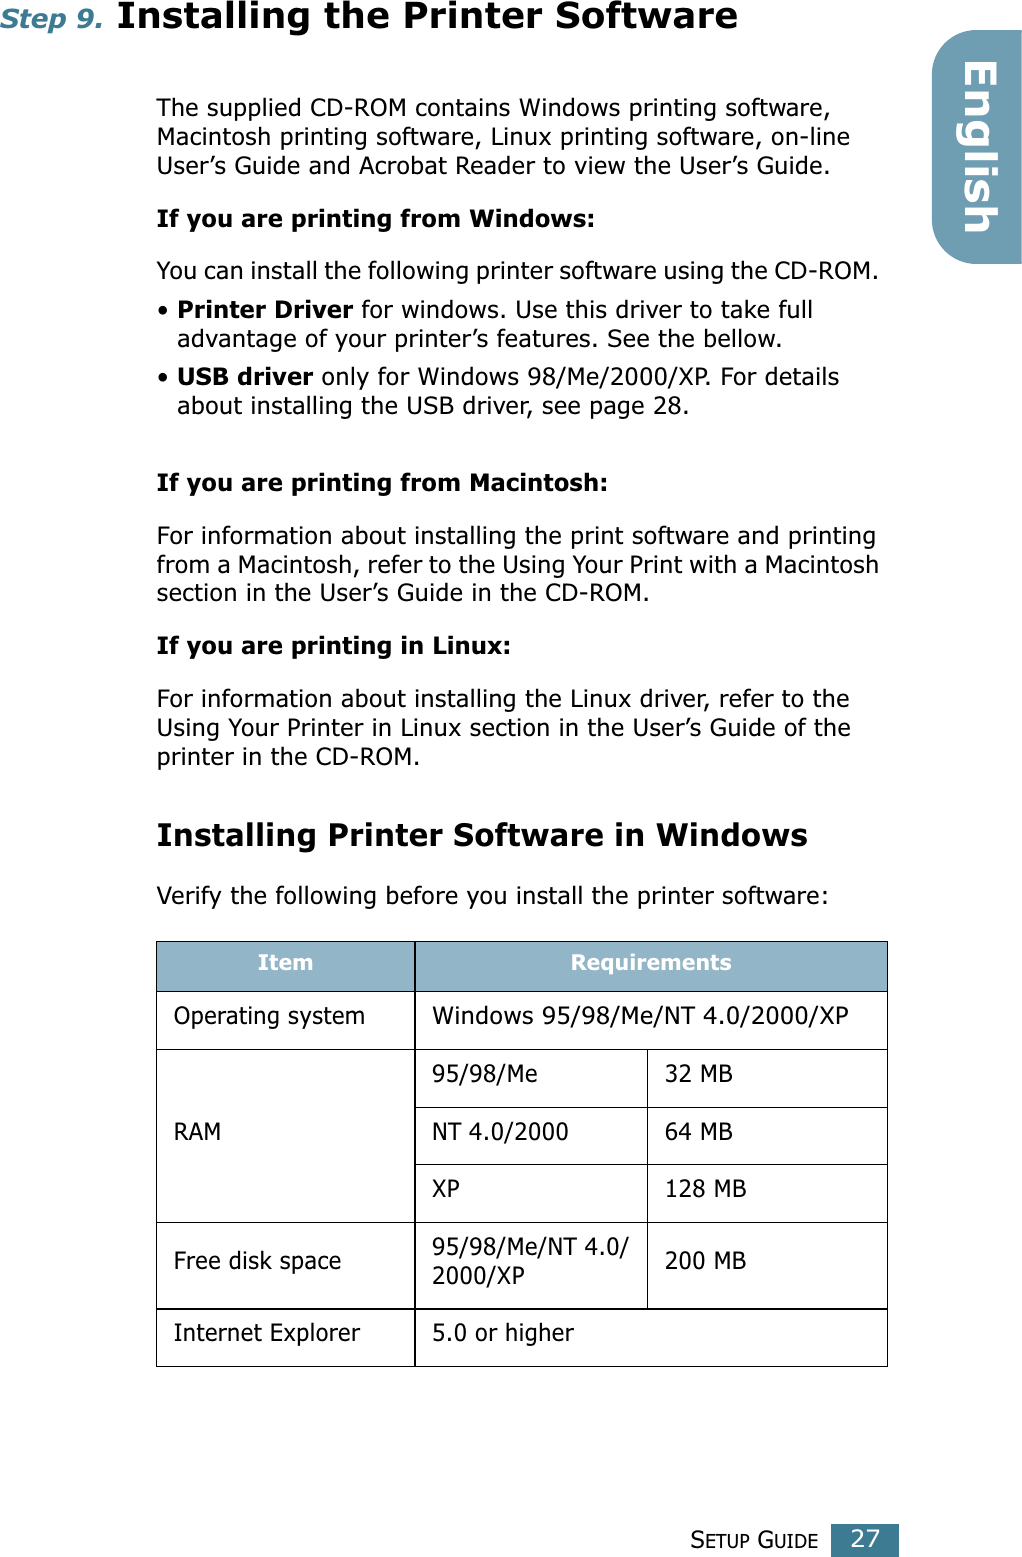 SETUP GUIDE27EnglishStep 9. Installing the Printer Software The supplied CD-ROM contains Windows printing software, Macintosh printing software, Linux printing software, on-line User’s Guide and Acrobat Reader to view the User’s Guide. If you are printing from Windows:You can install the following printer software using the CD-ROM. • Printer Driver for windows. Use this driver to take full advantage of your printer’s features. See the bellow.• USB driver only for Windows 98/Me/2000/XP. For details about installing the USB driver, see page 28. If you are printing from Macintosh:For information about installing the print software and printing from a Macintosh, refer to the Using Your Print with a Macintosh section in the User’s Guide in the CD-ROM.If you are printing in Linux:For information about installing the Linux driver, refer to the Using Your Printer in Linux section in the User’s Guide of the printer in the CD-ROM.Installing Printer Software in WindowsVerify the following before you install the printer software:Item RequirementsOperating systemWindows 95/98/Me/NT 4.0/2000/XPRAM95/98/Me 32 MBNT 4.0/2000 64 MBXP 128 MBFree disk space 95/98/Me/NT 4.0/2000/XP 200 MBInternet Explorer 5.0 or higher